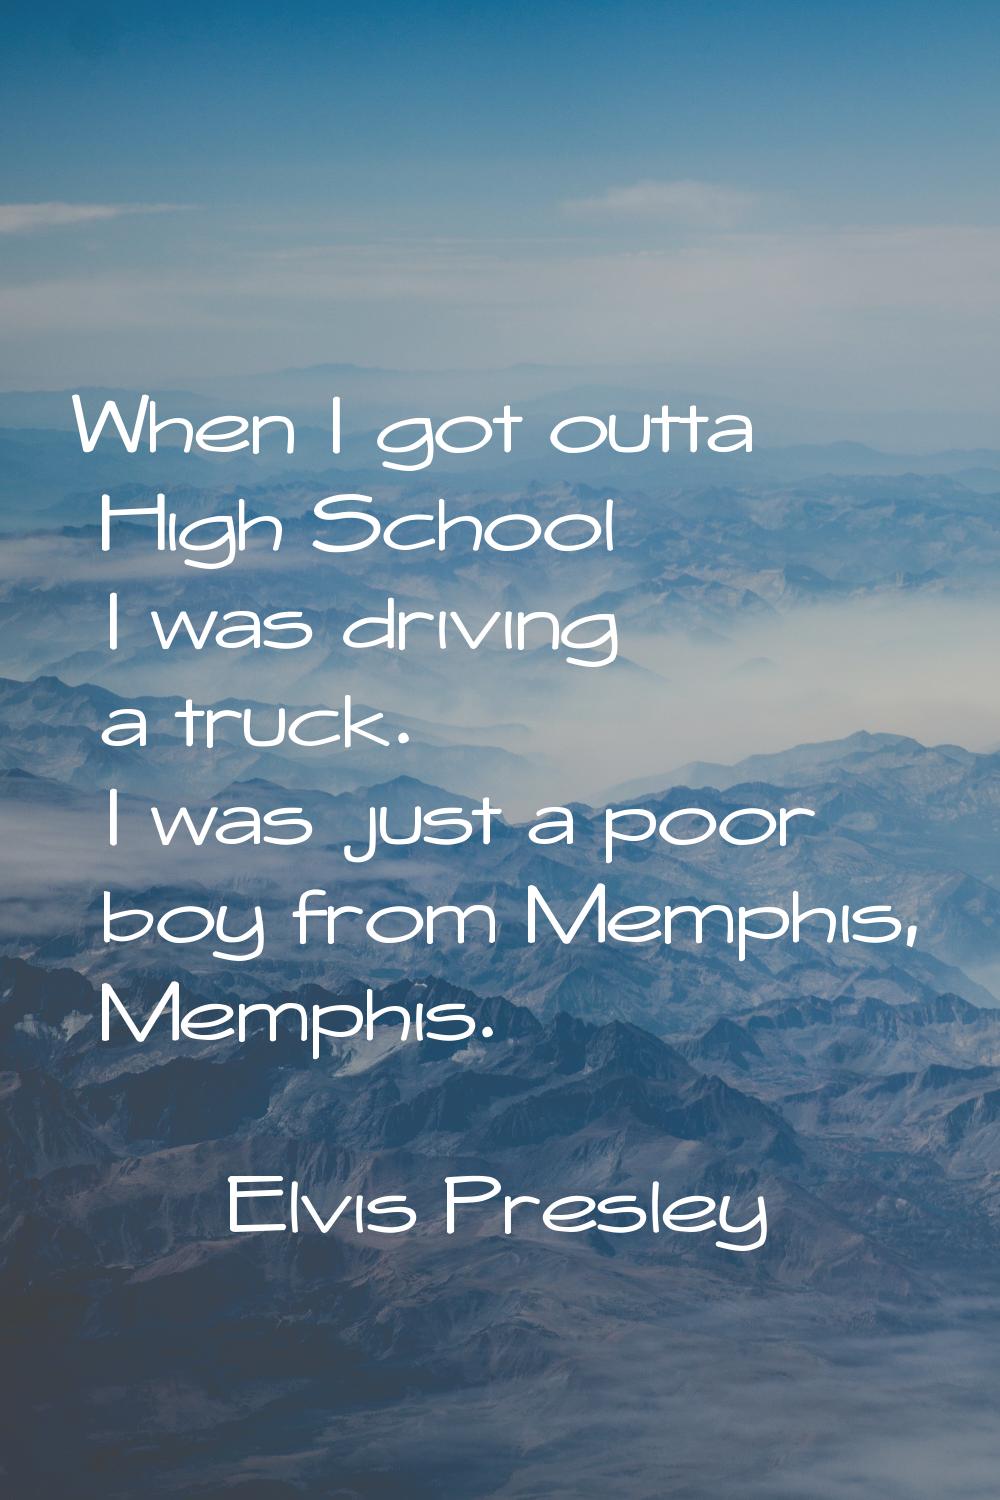 When I got outta High School I was driving a truck. I was just a poor boy from Memphis, Memphis.